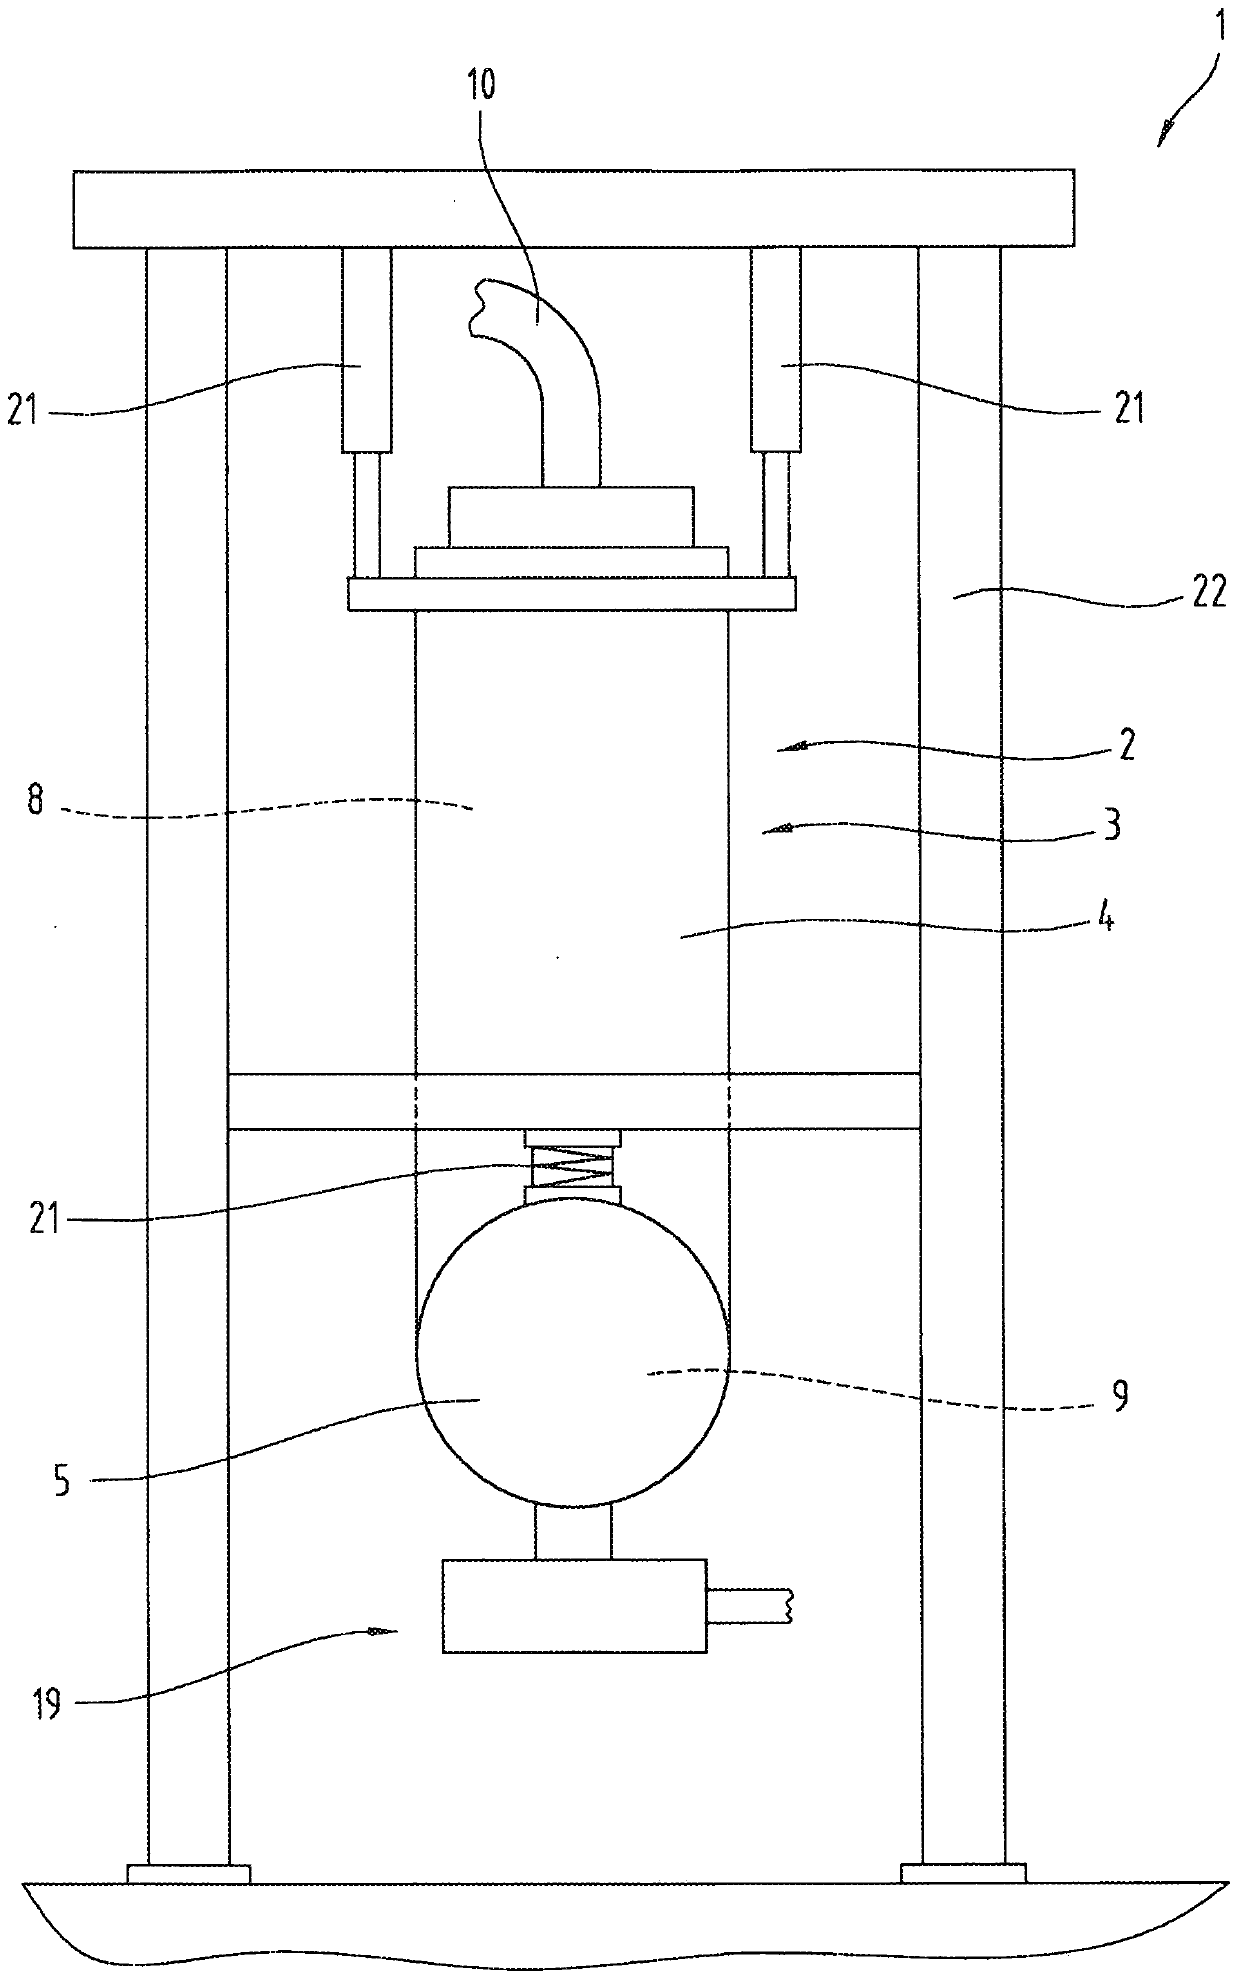 Apparatus and method for processing plastic melts